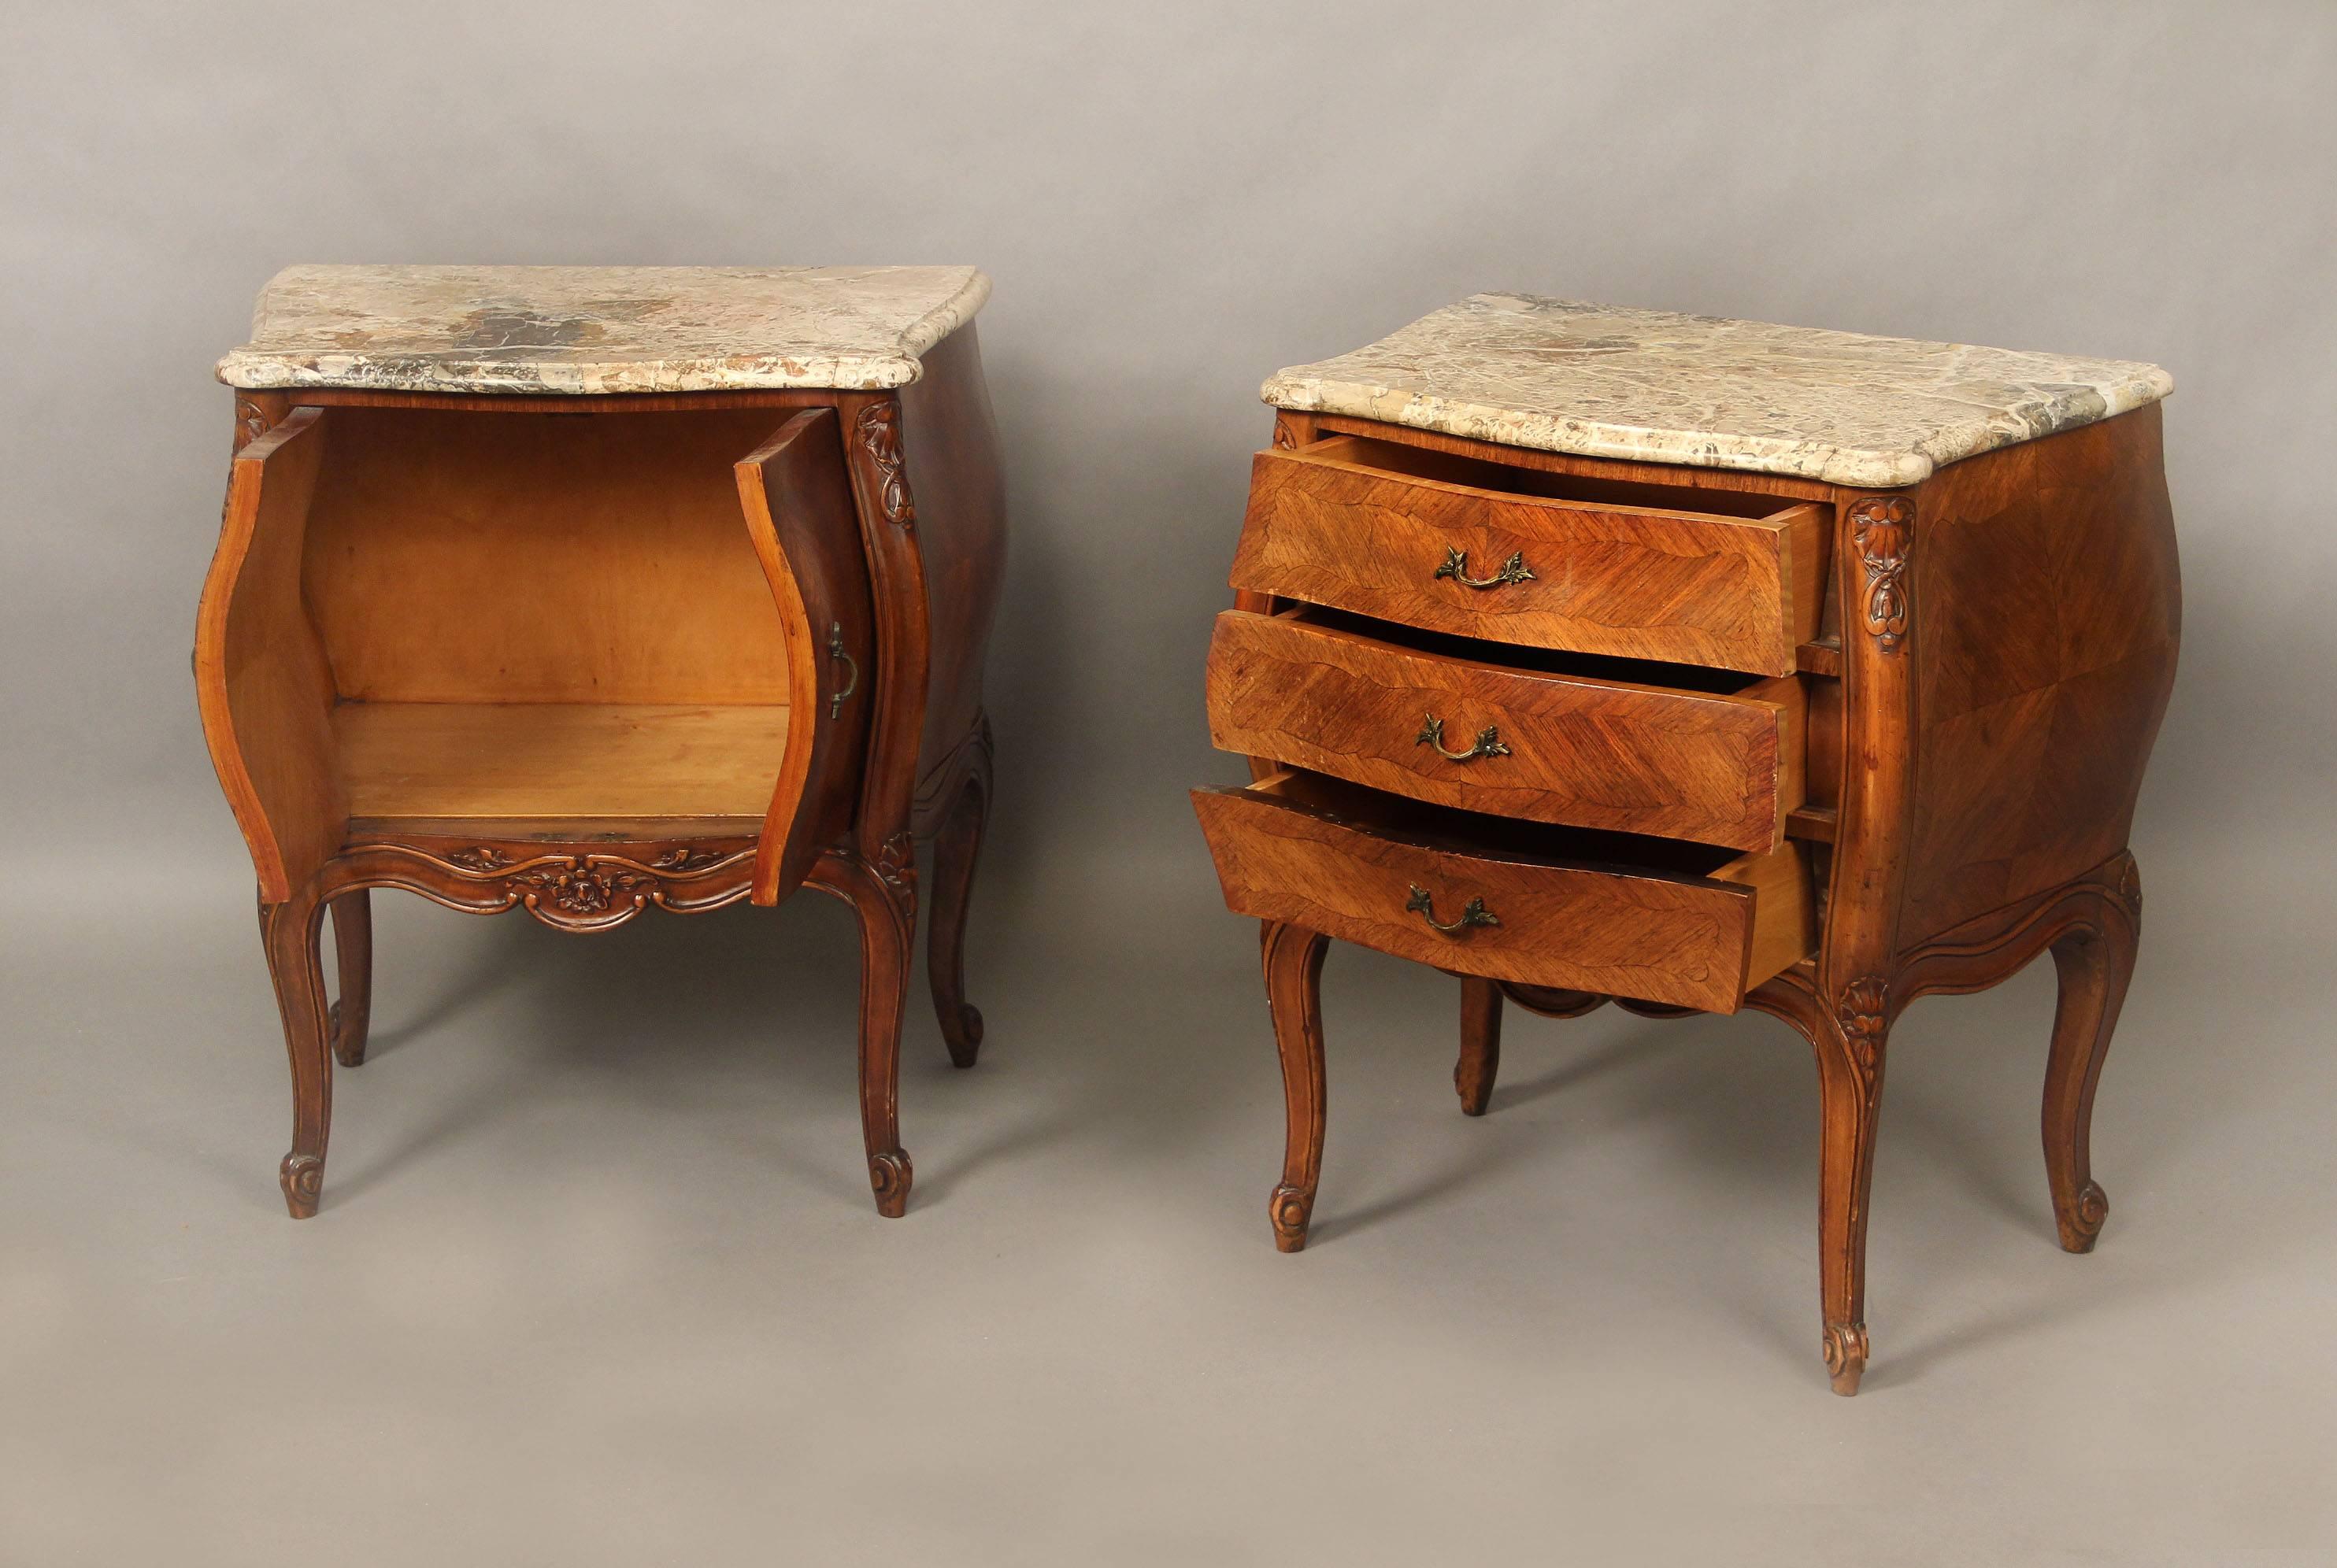 A pair of late 19th century Louis XV style carved wood night tables.

Finely veneered with marble tops. One night table with three drawers, the other with two doors.